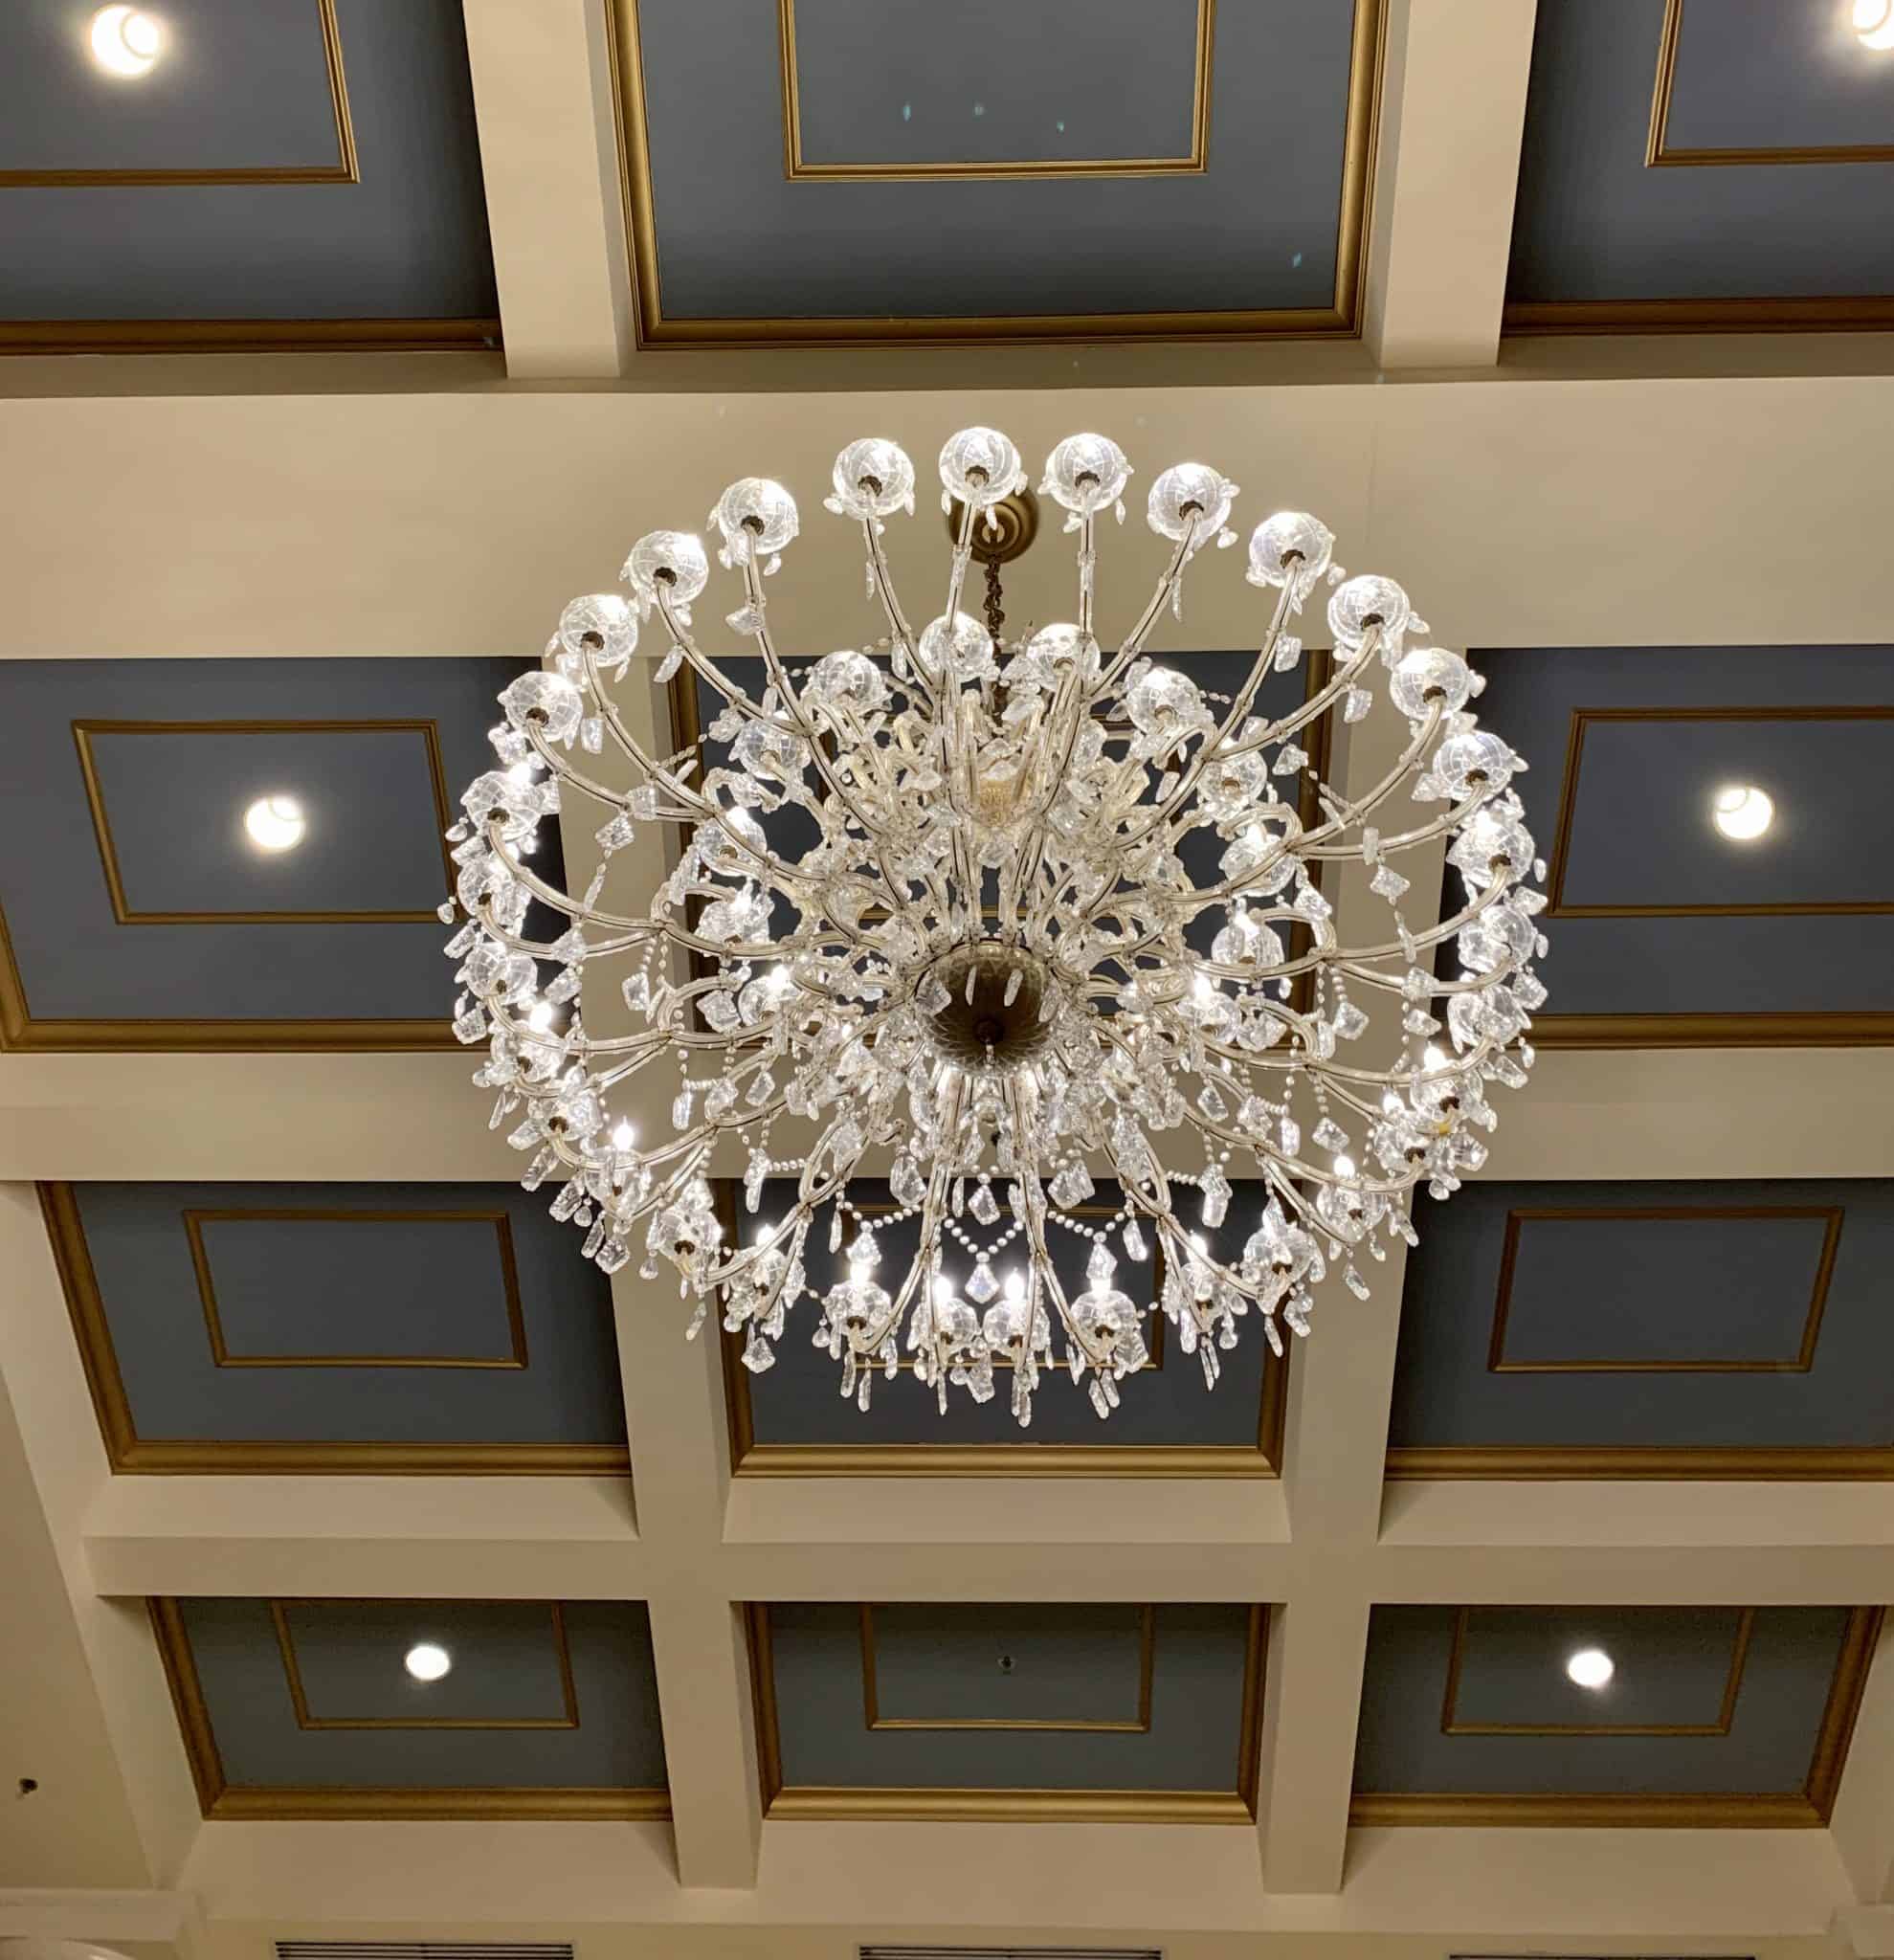 Chandelier at The Carolina Opry